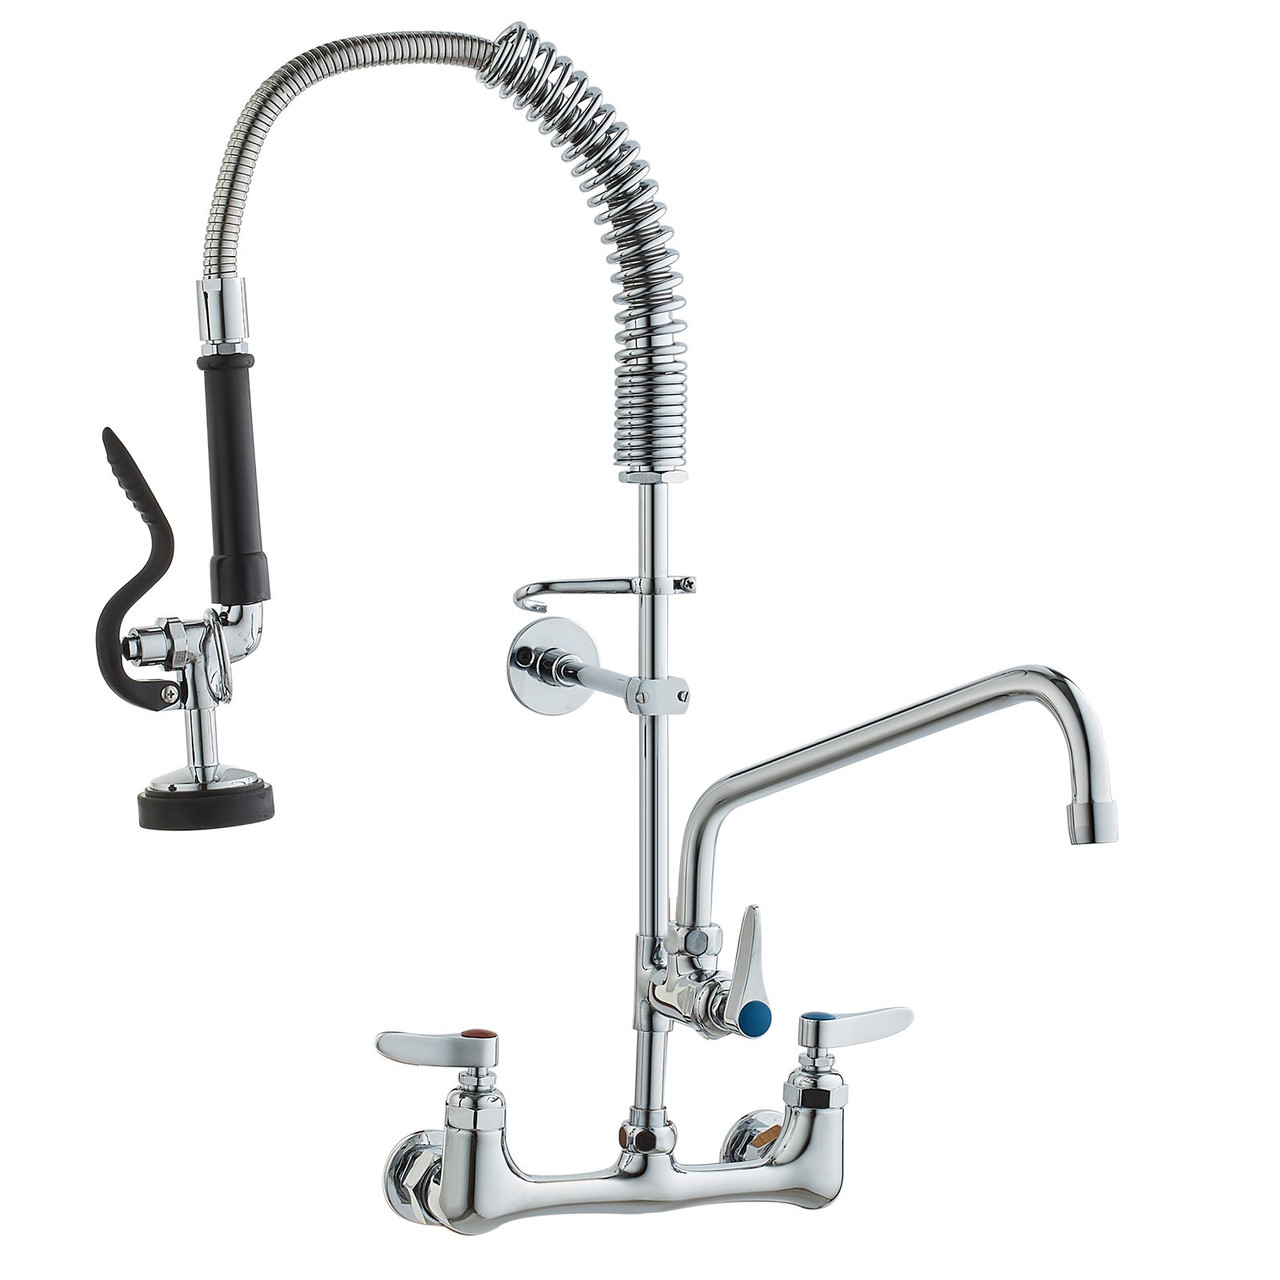 VEVOR Commercial Faucet with Pre-Rinse Sprayer, 25" Height, 8" Center, 12" Swing Spout, Wall Mount Kitchen Sink Faucet, Brass Constructed Device with Pull Down Spray, for 1/2/3 Compartment Sink